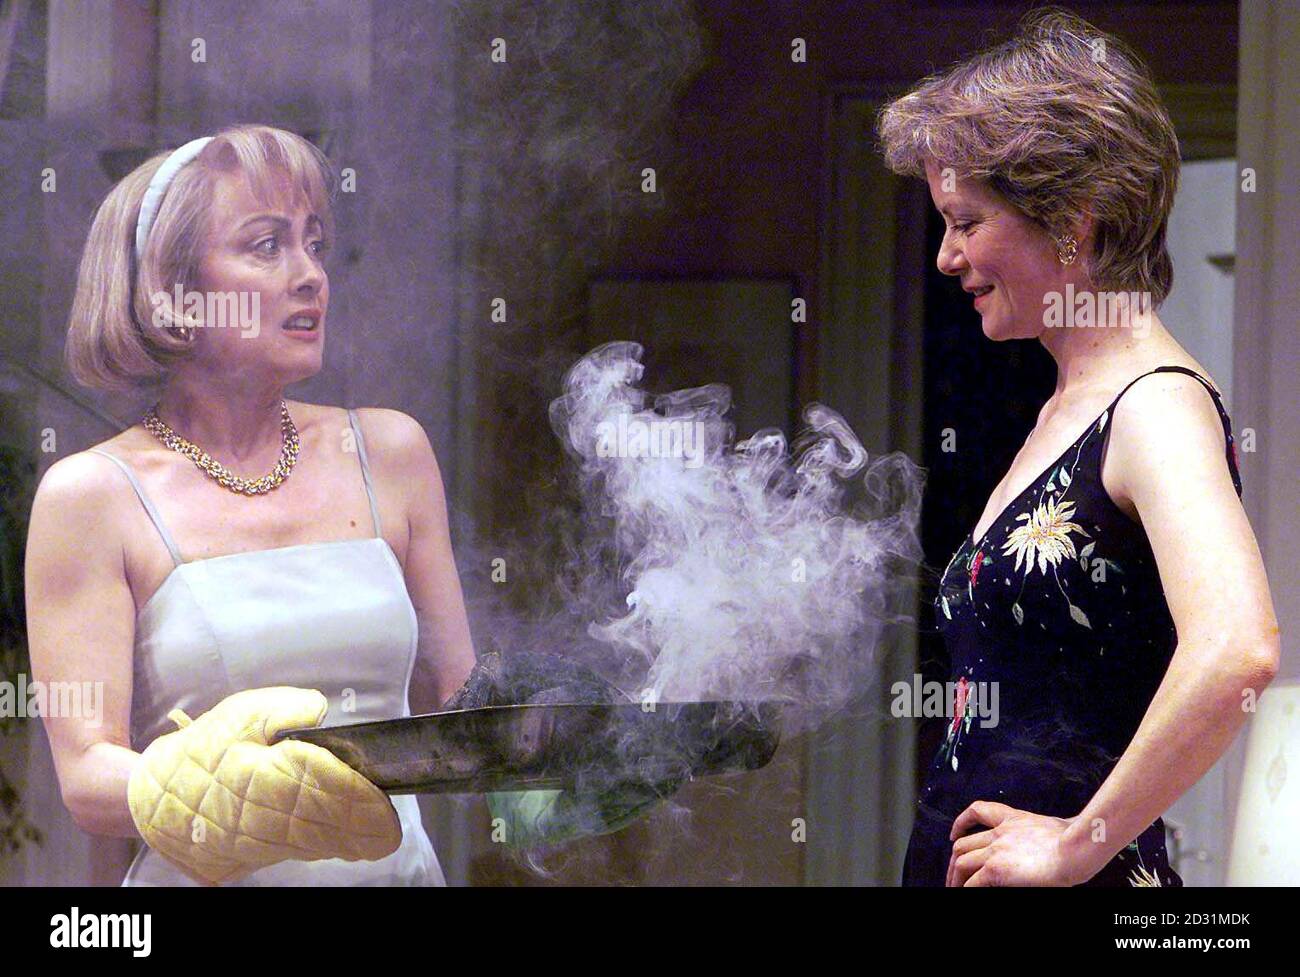 A preview at the Apollo theatre in Shaftesbury Avenue, London, of 'The Female Odd Couple', with actresses Paula Wilcox (left) as Florence, and Jenny Seagrove as Olive. The play is based on the film 'The Odd Couple', with Walter Matthau and Jack Lemmon.  * ...which in turn was based on the original stage play by Neil Simon. Stock Photo